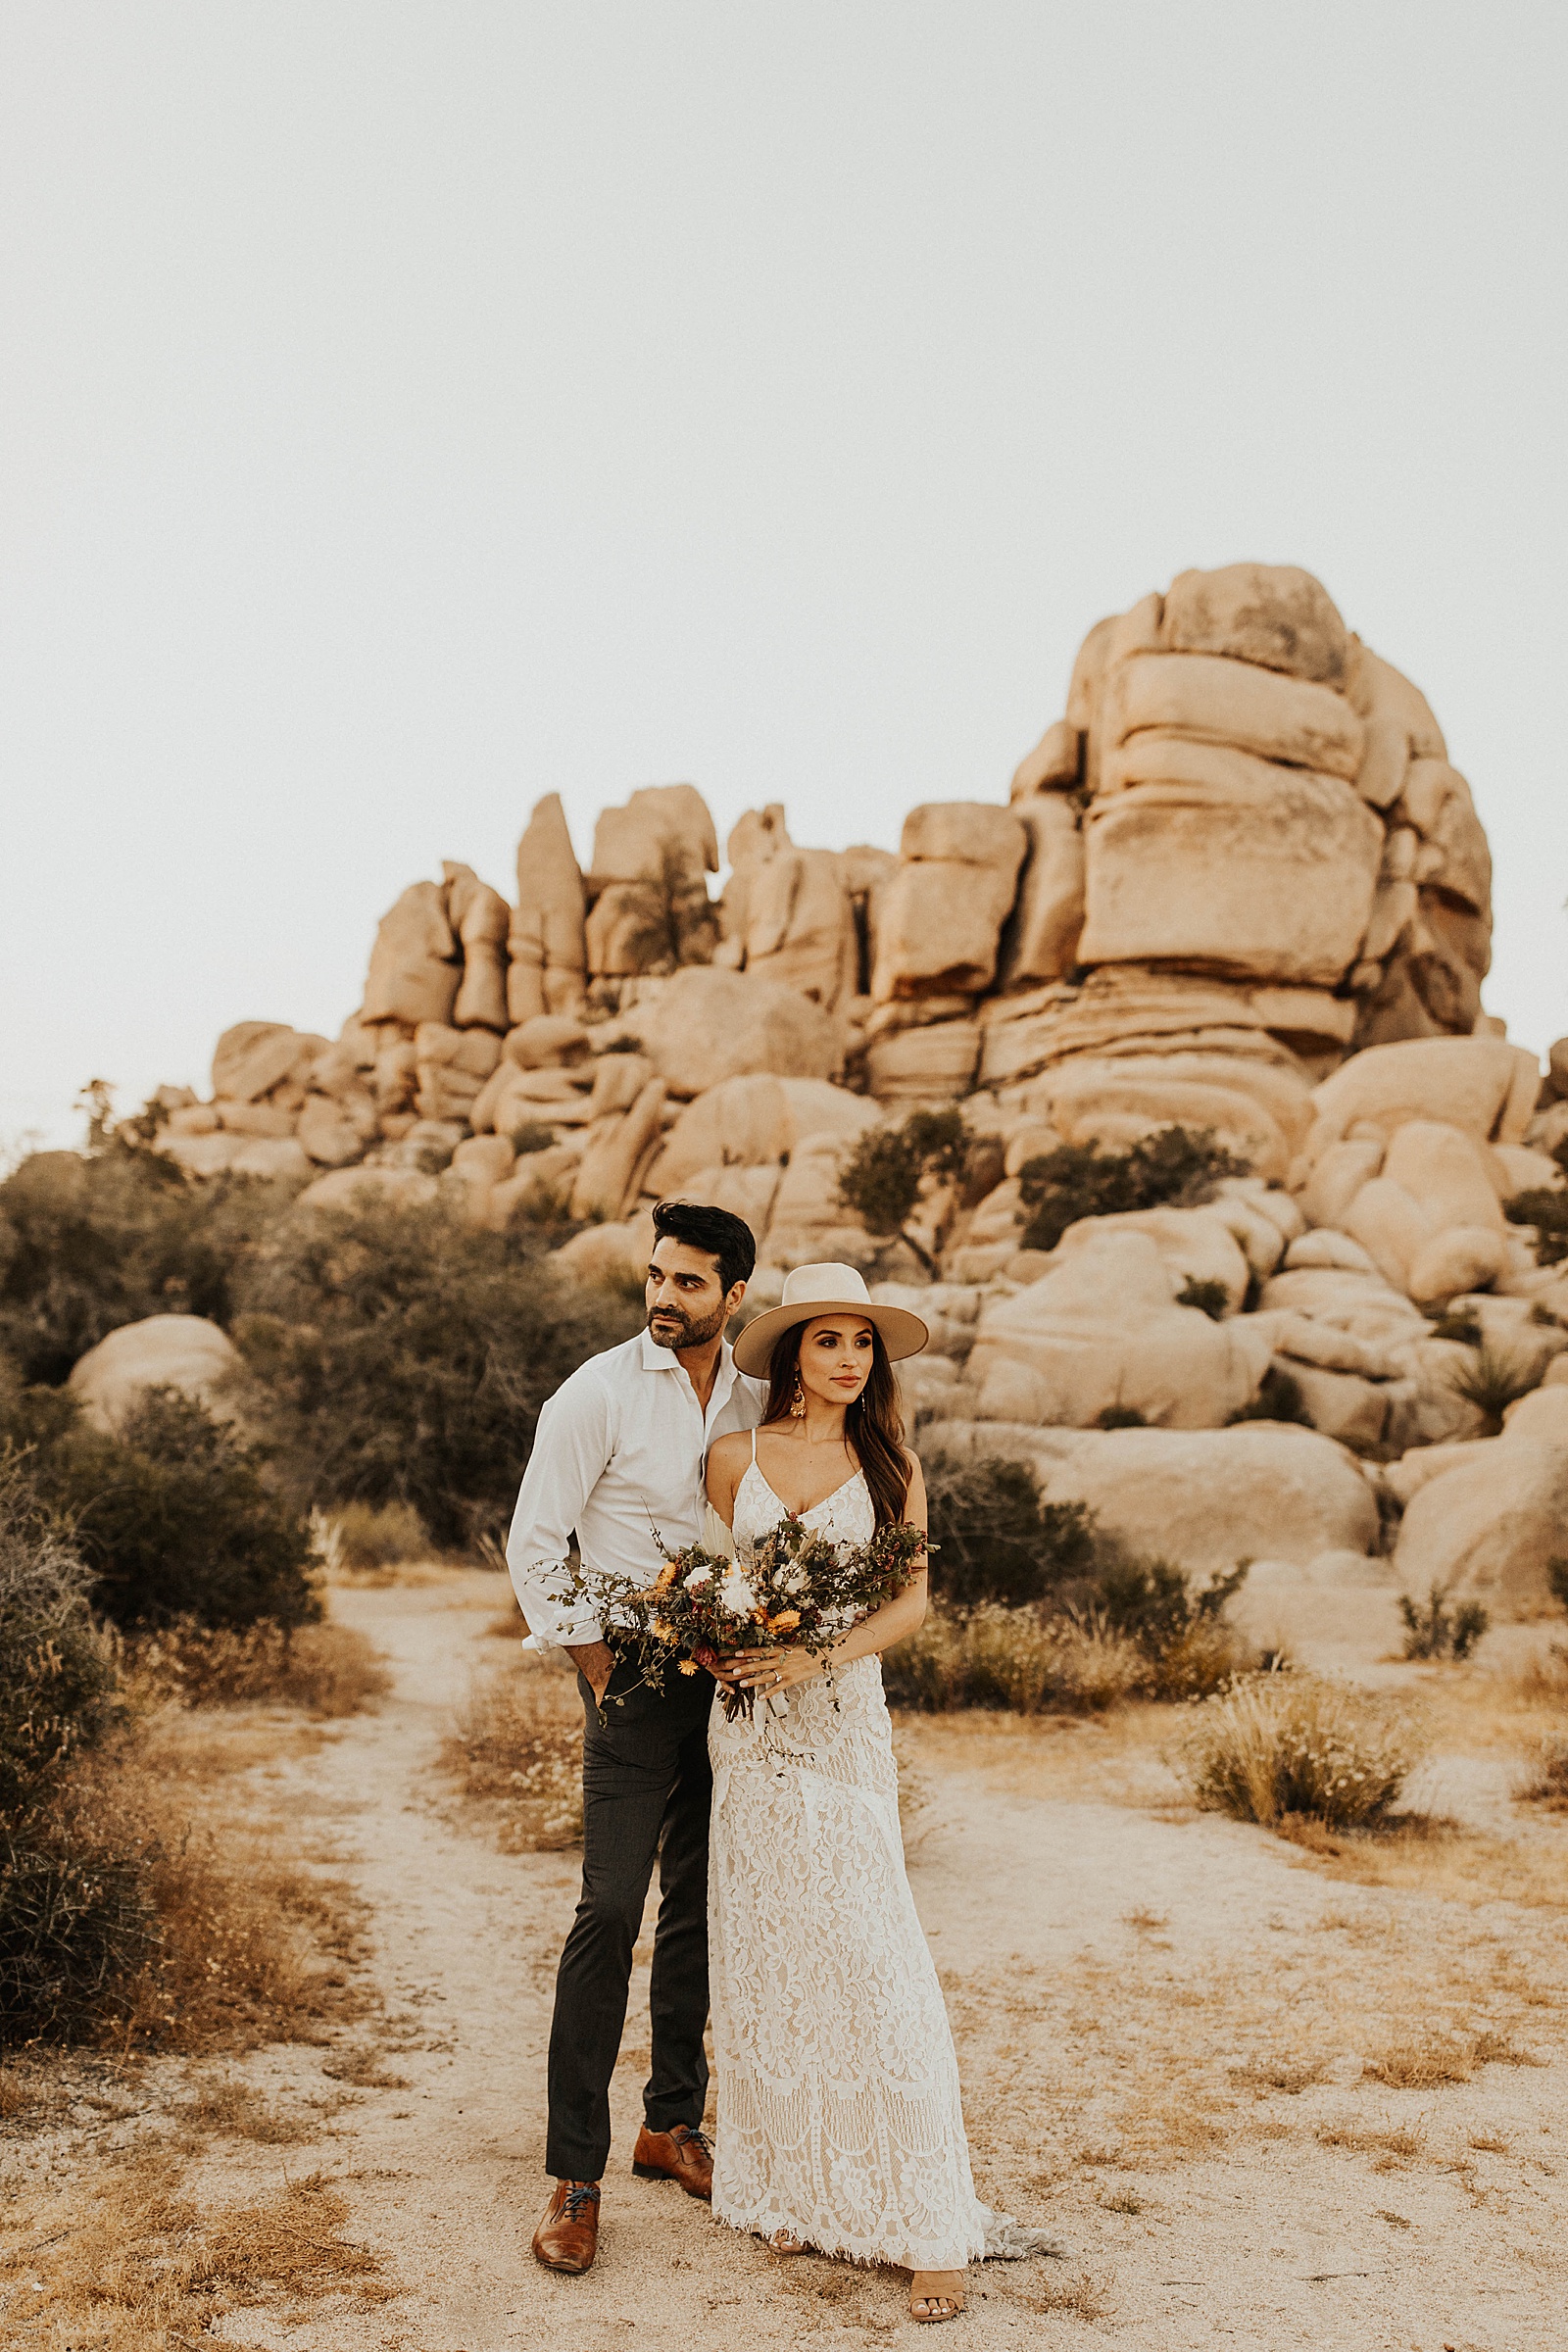 A bride and groom photo at their elopement in Hidden Valley, Joshua Tree National Park.